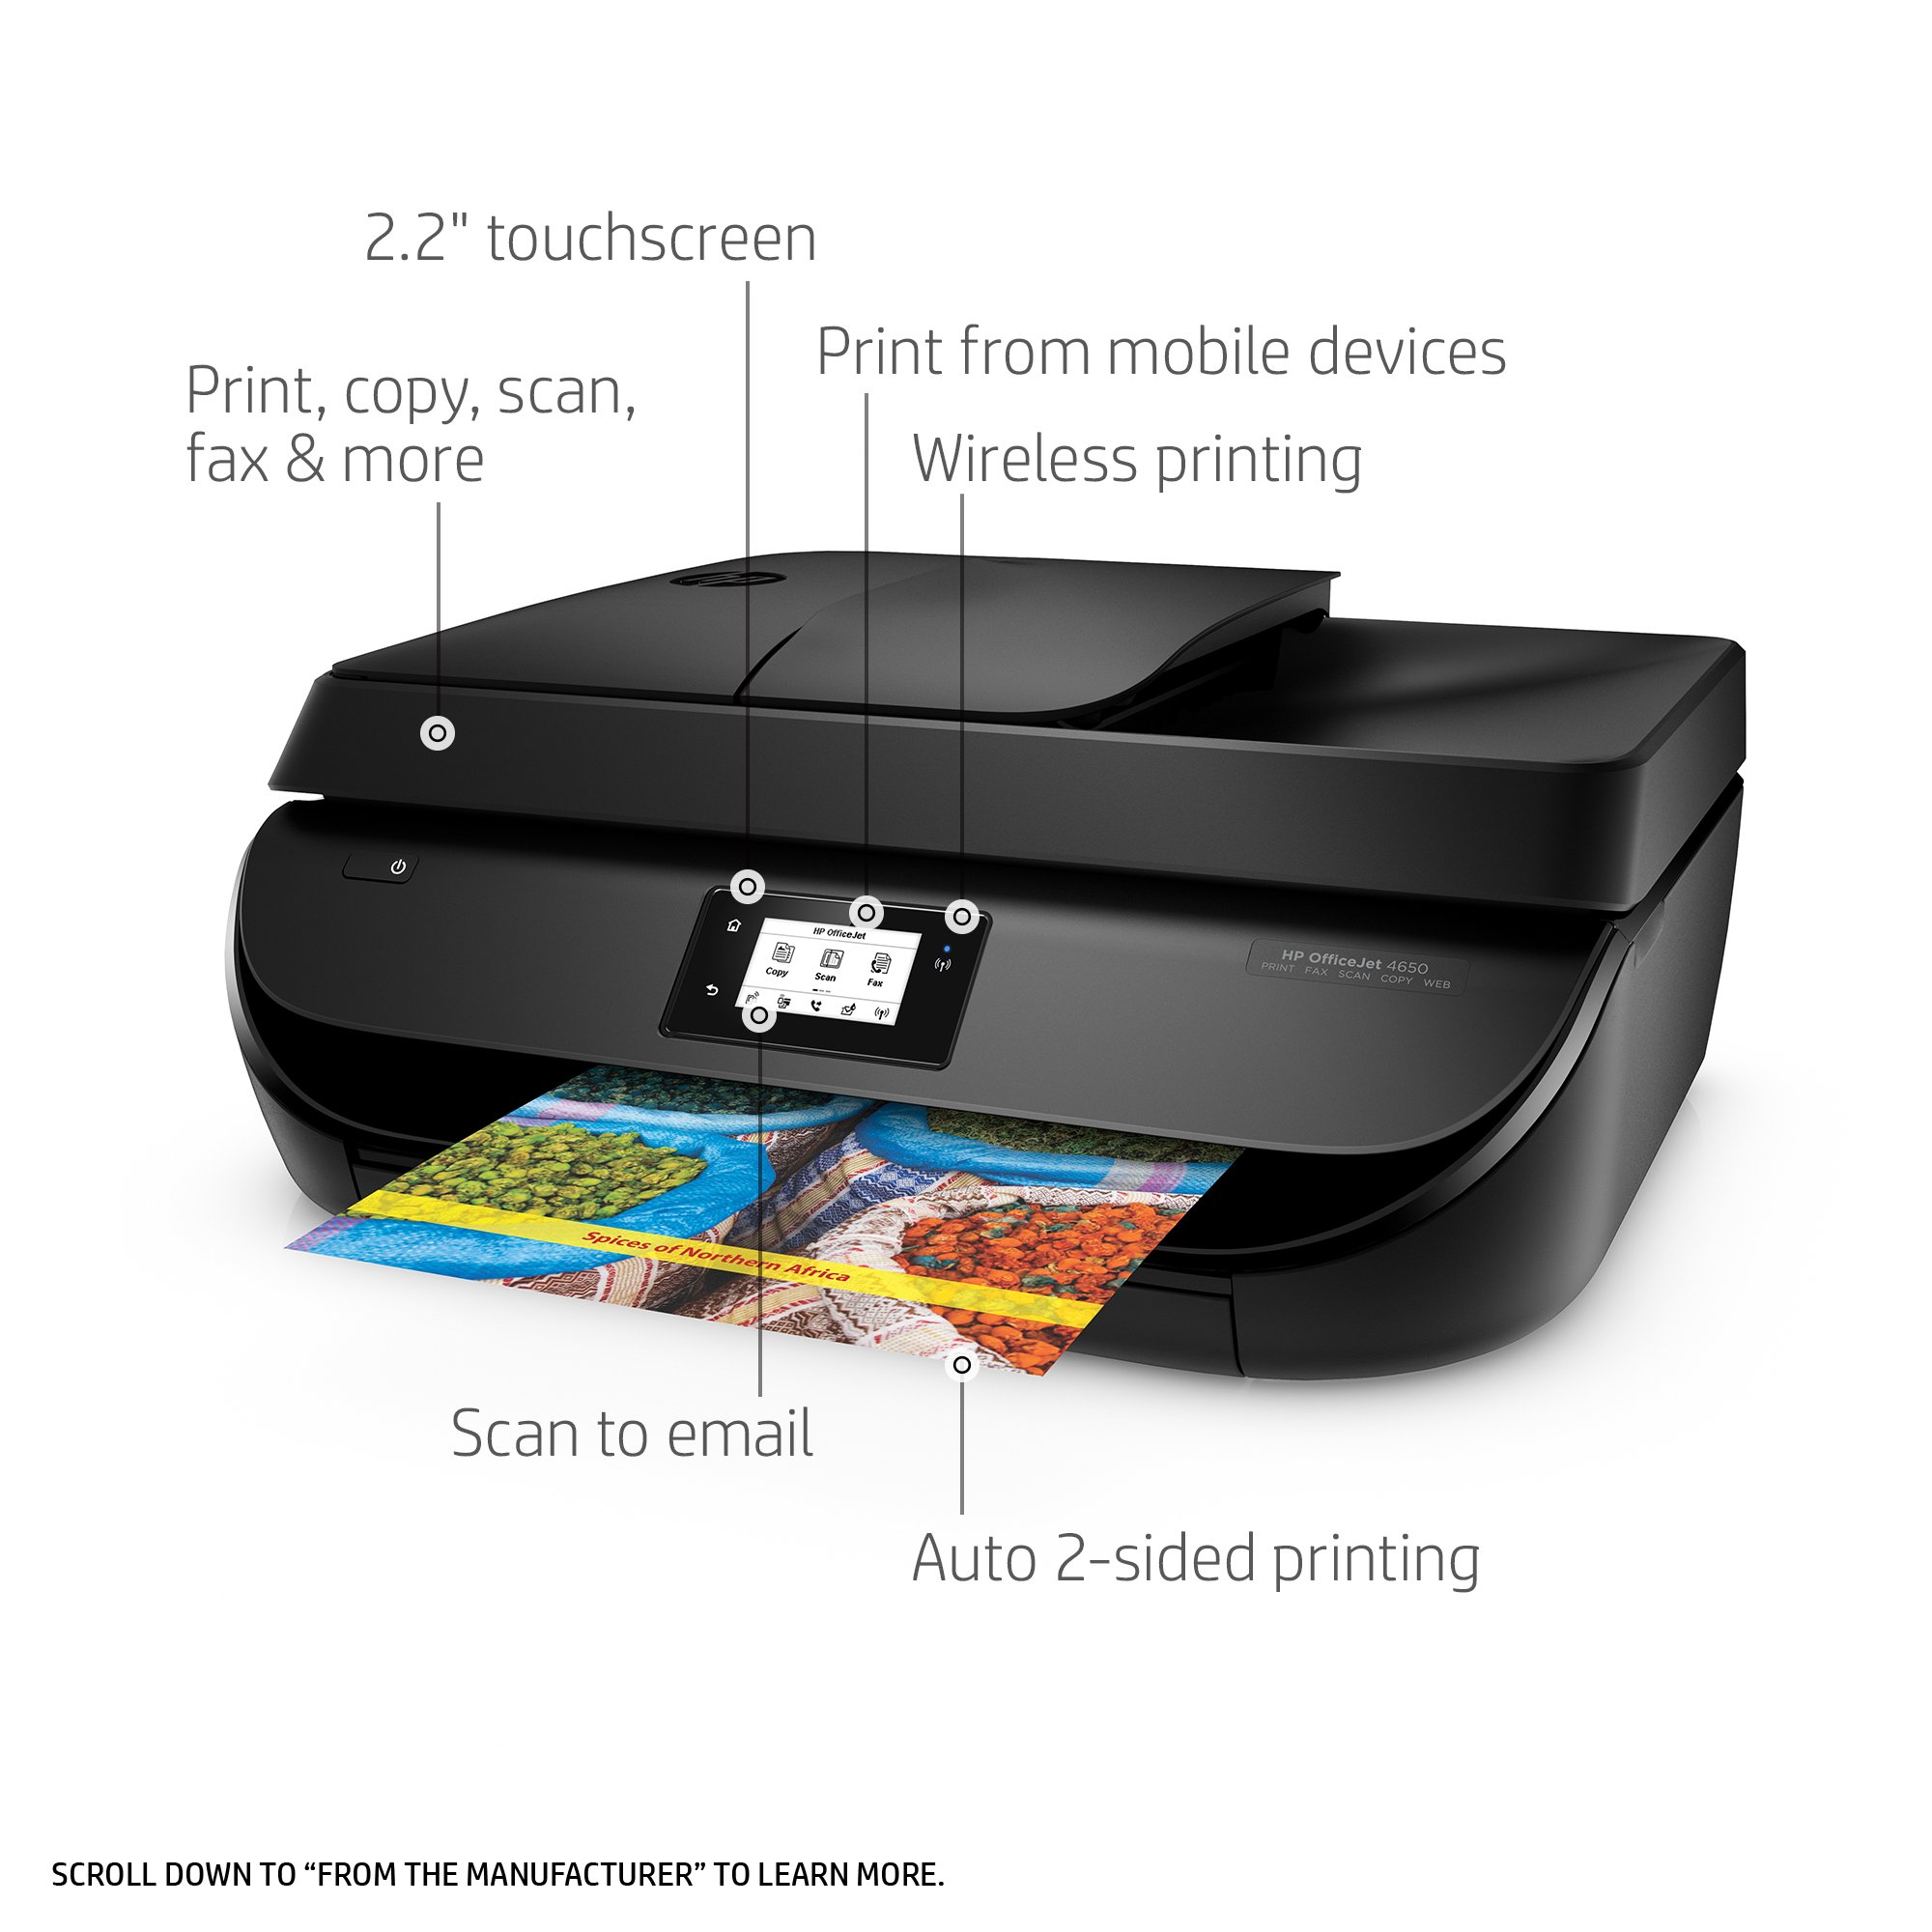 OfficeJet 4650 All-in-One Printer series